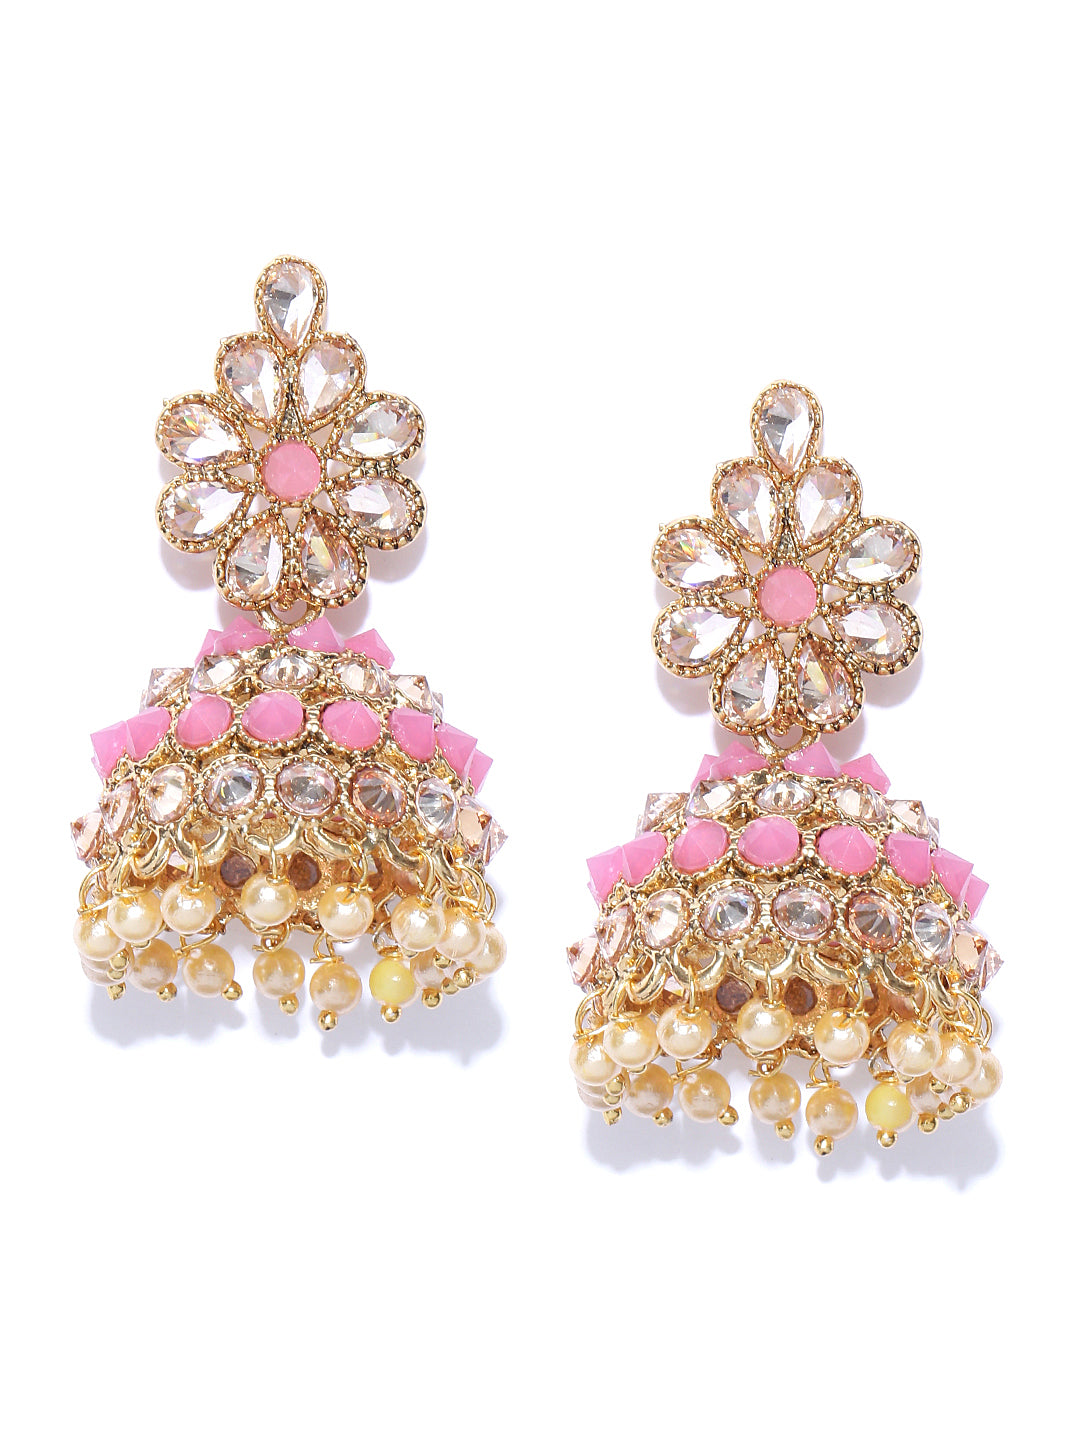 Gold-Plated Pink and White Stones Studded Floral Patterned Jhumka Earrings with Pearl Drop